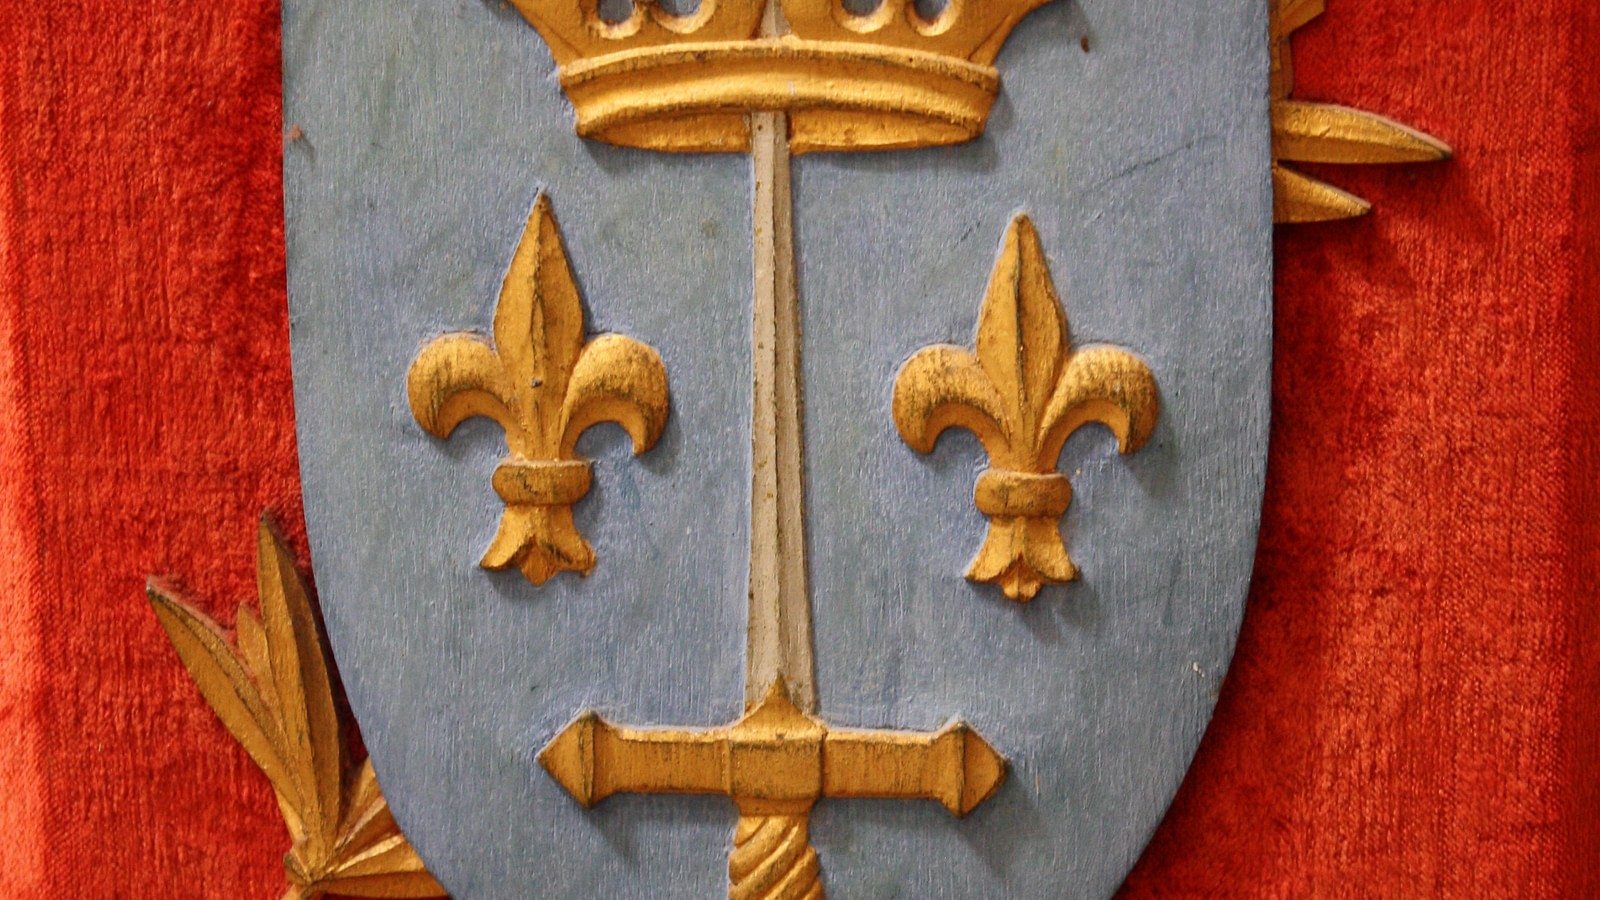 Gold Shield Medieval Wall Decor with Fleur de Lis, Eagle, Knight. Coat of  Arms